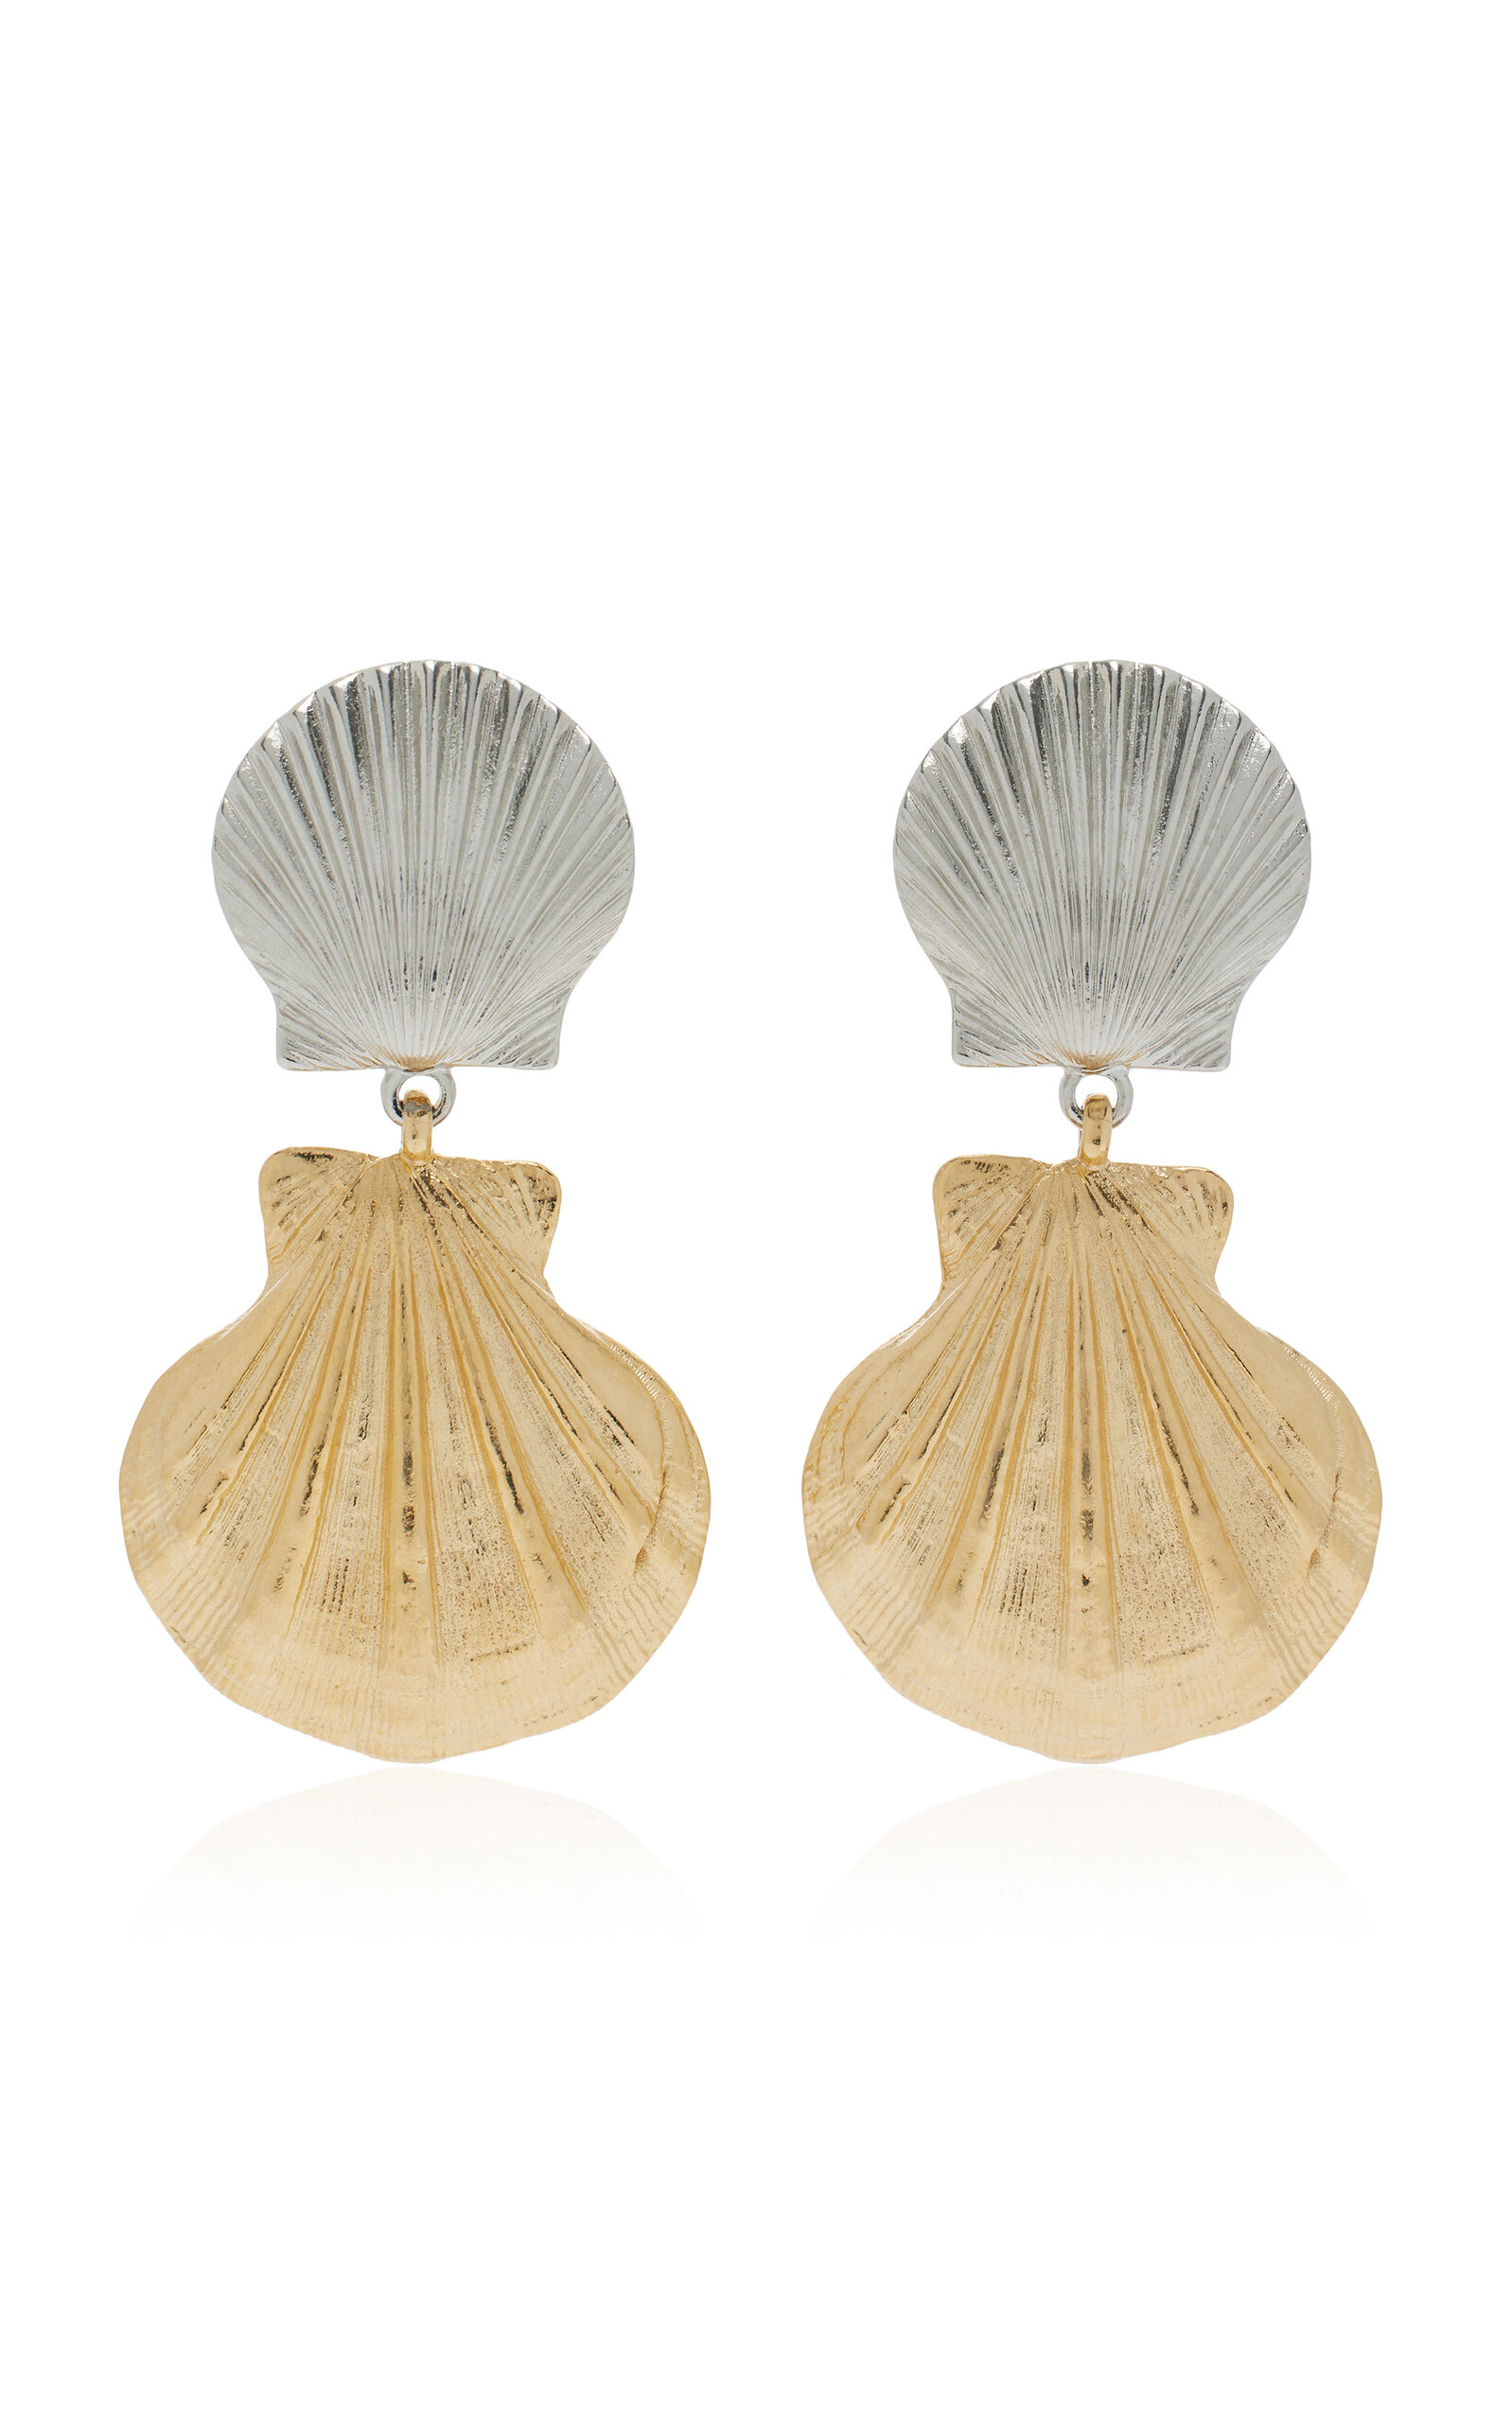 Ben-amun Exclusive Gold And Silver-tone Shell Earrings In Gray